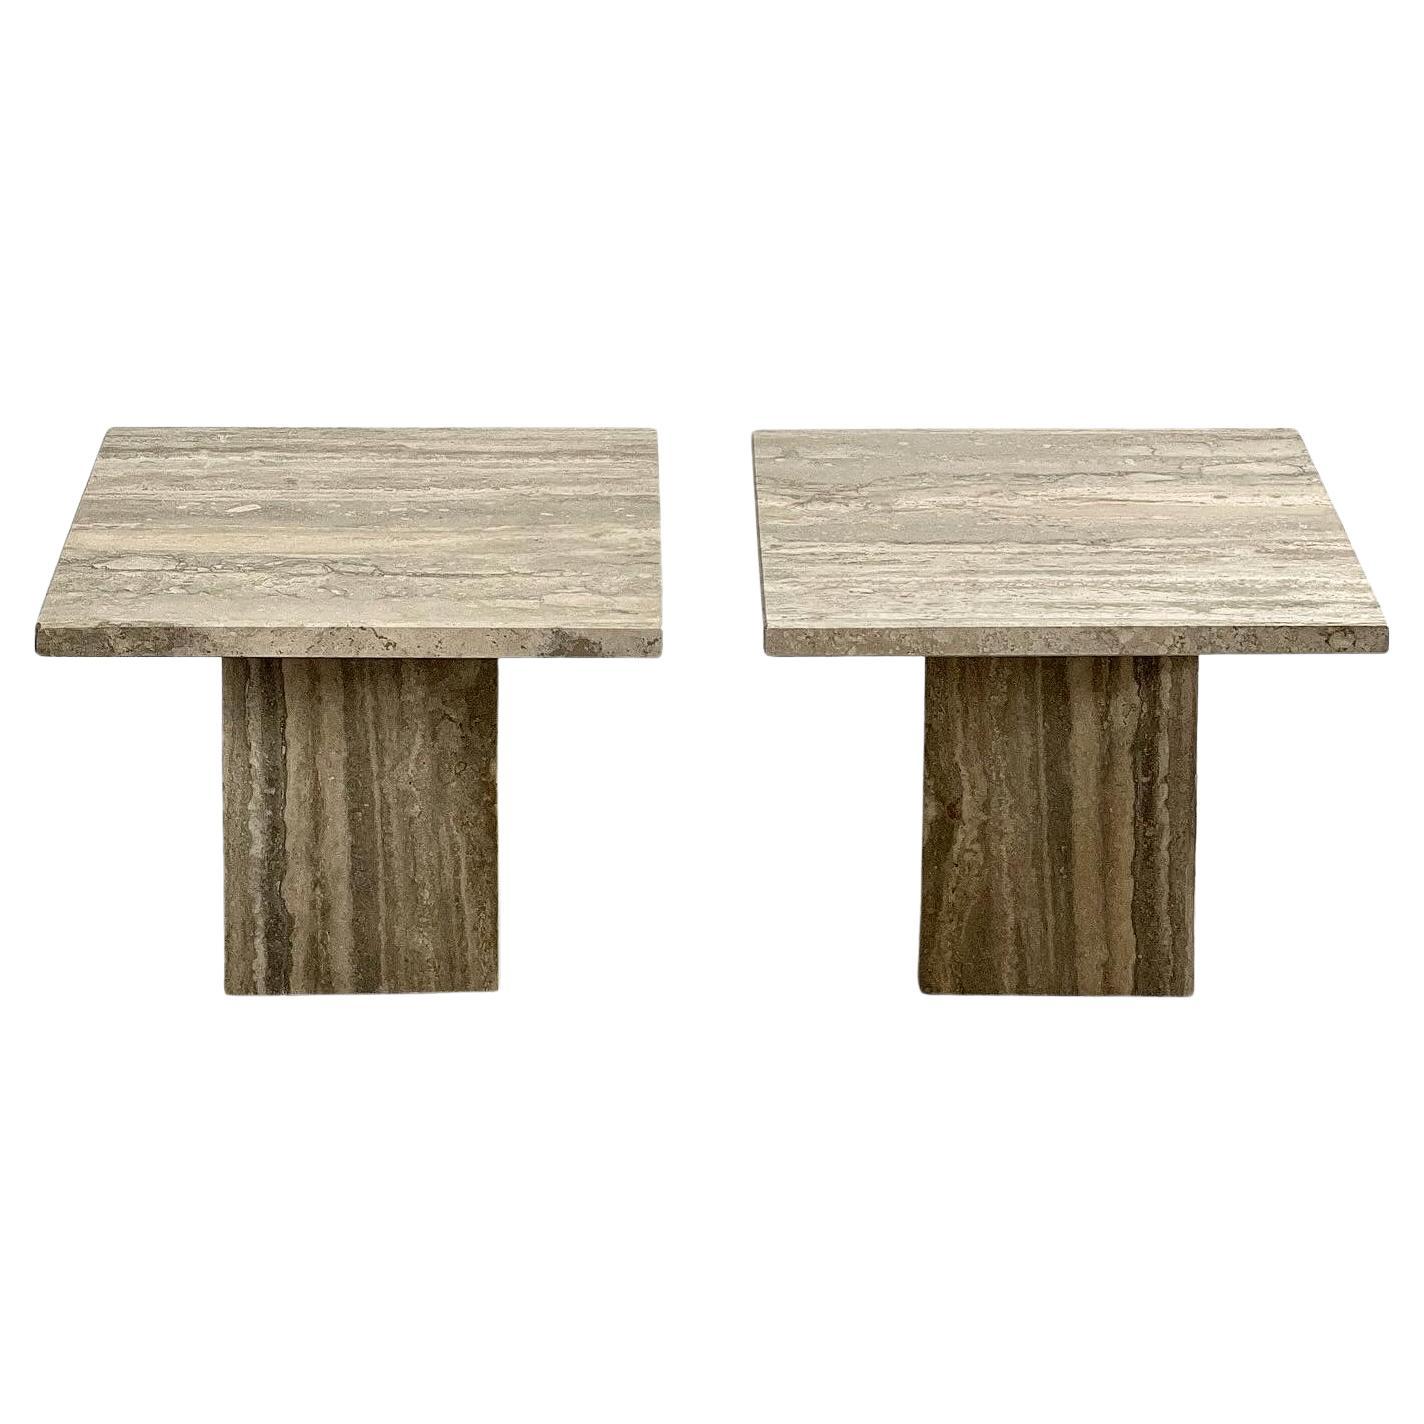 Set of Two Mid-Century Modern Side Tables in Travertine, Urban Wabi Style, Pair